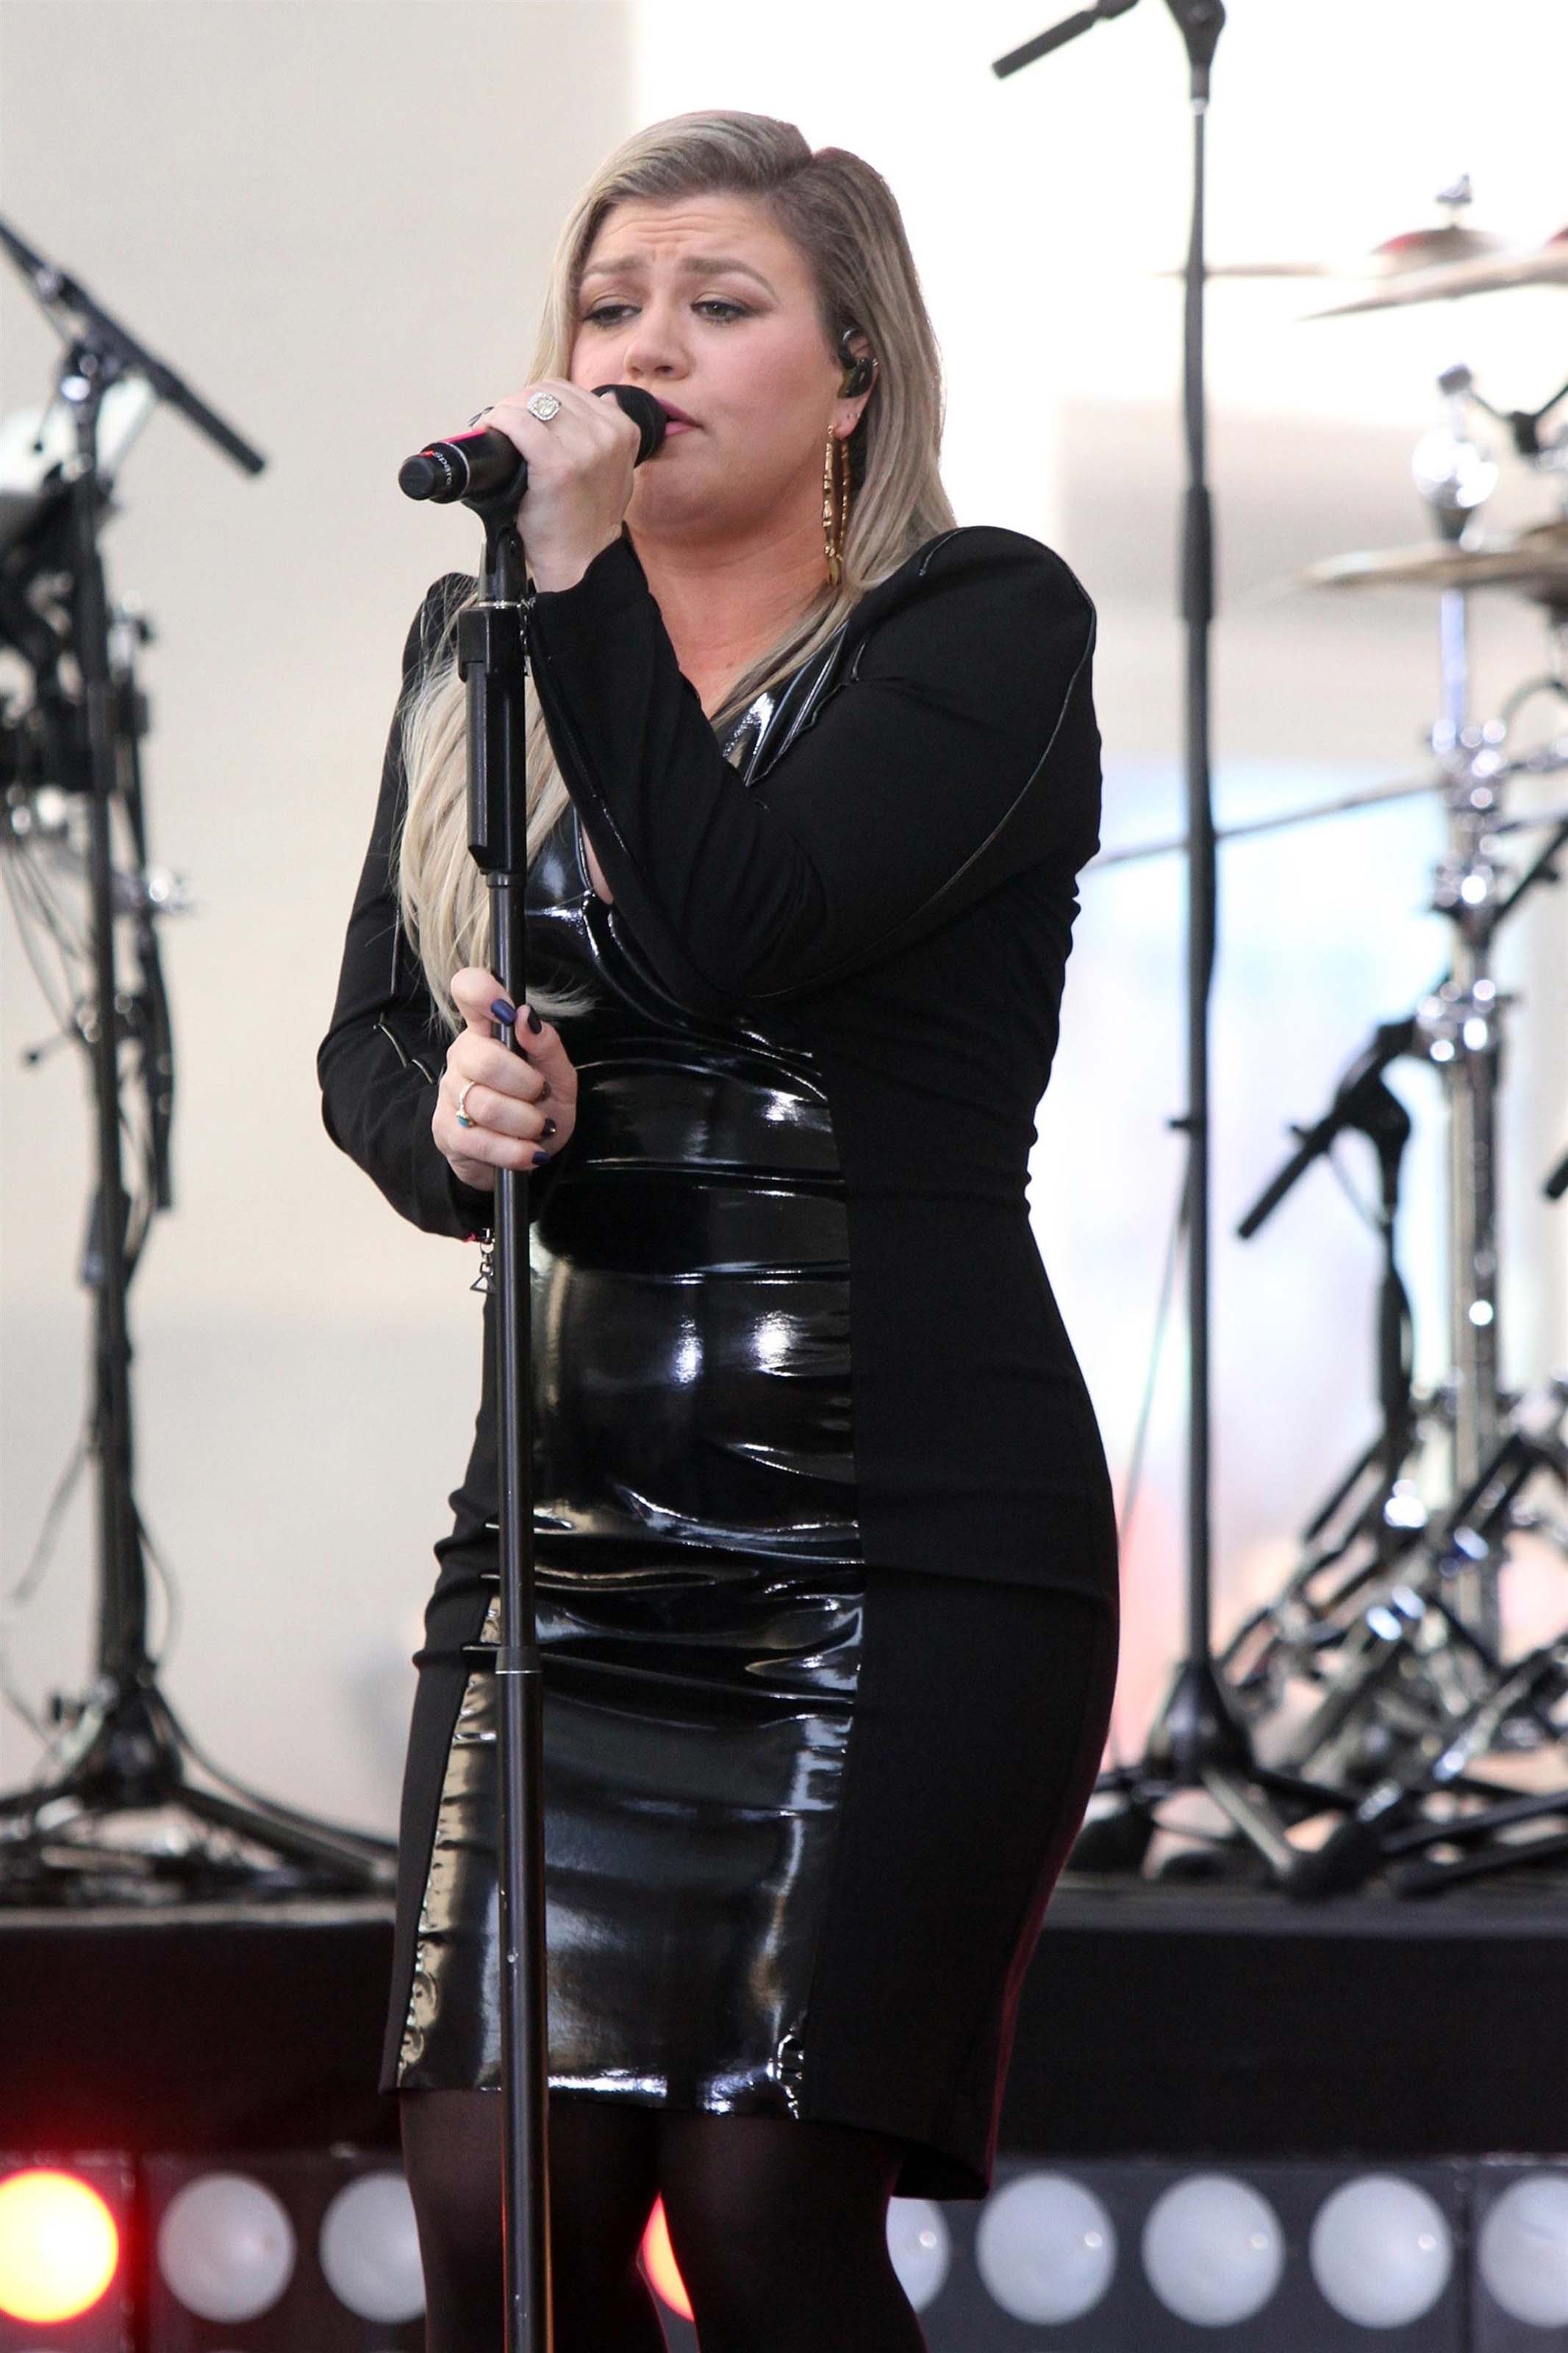 Kelly Clarkson attends NBC’s “Today” Show Concert Series